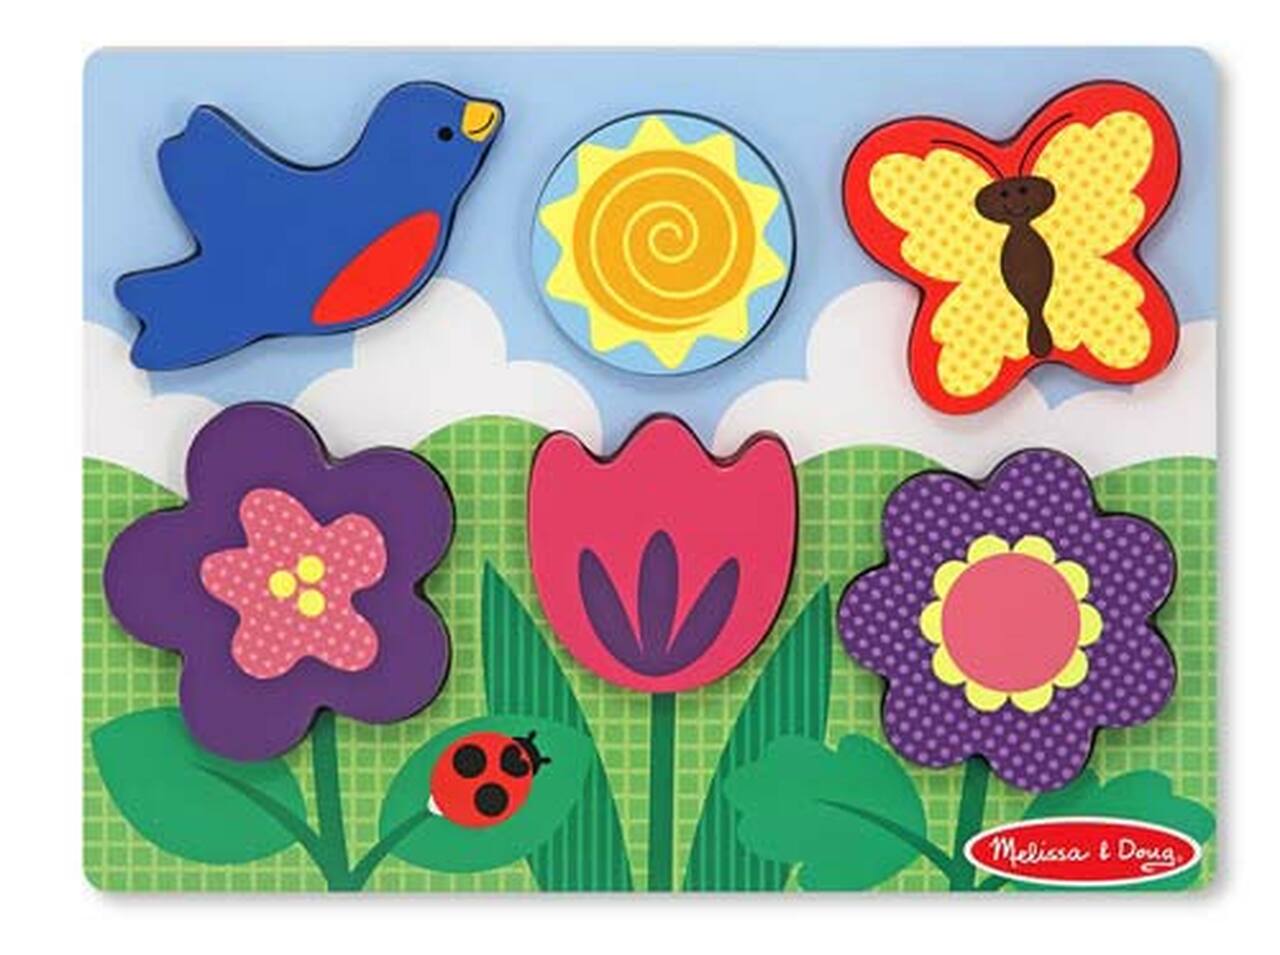 Melissa and Doug My First Chunky Puzzle Scene Flower Garden Item # 3753 Ages 2+ Wooden, Sturdy